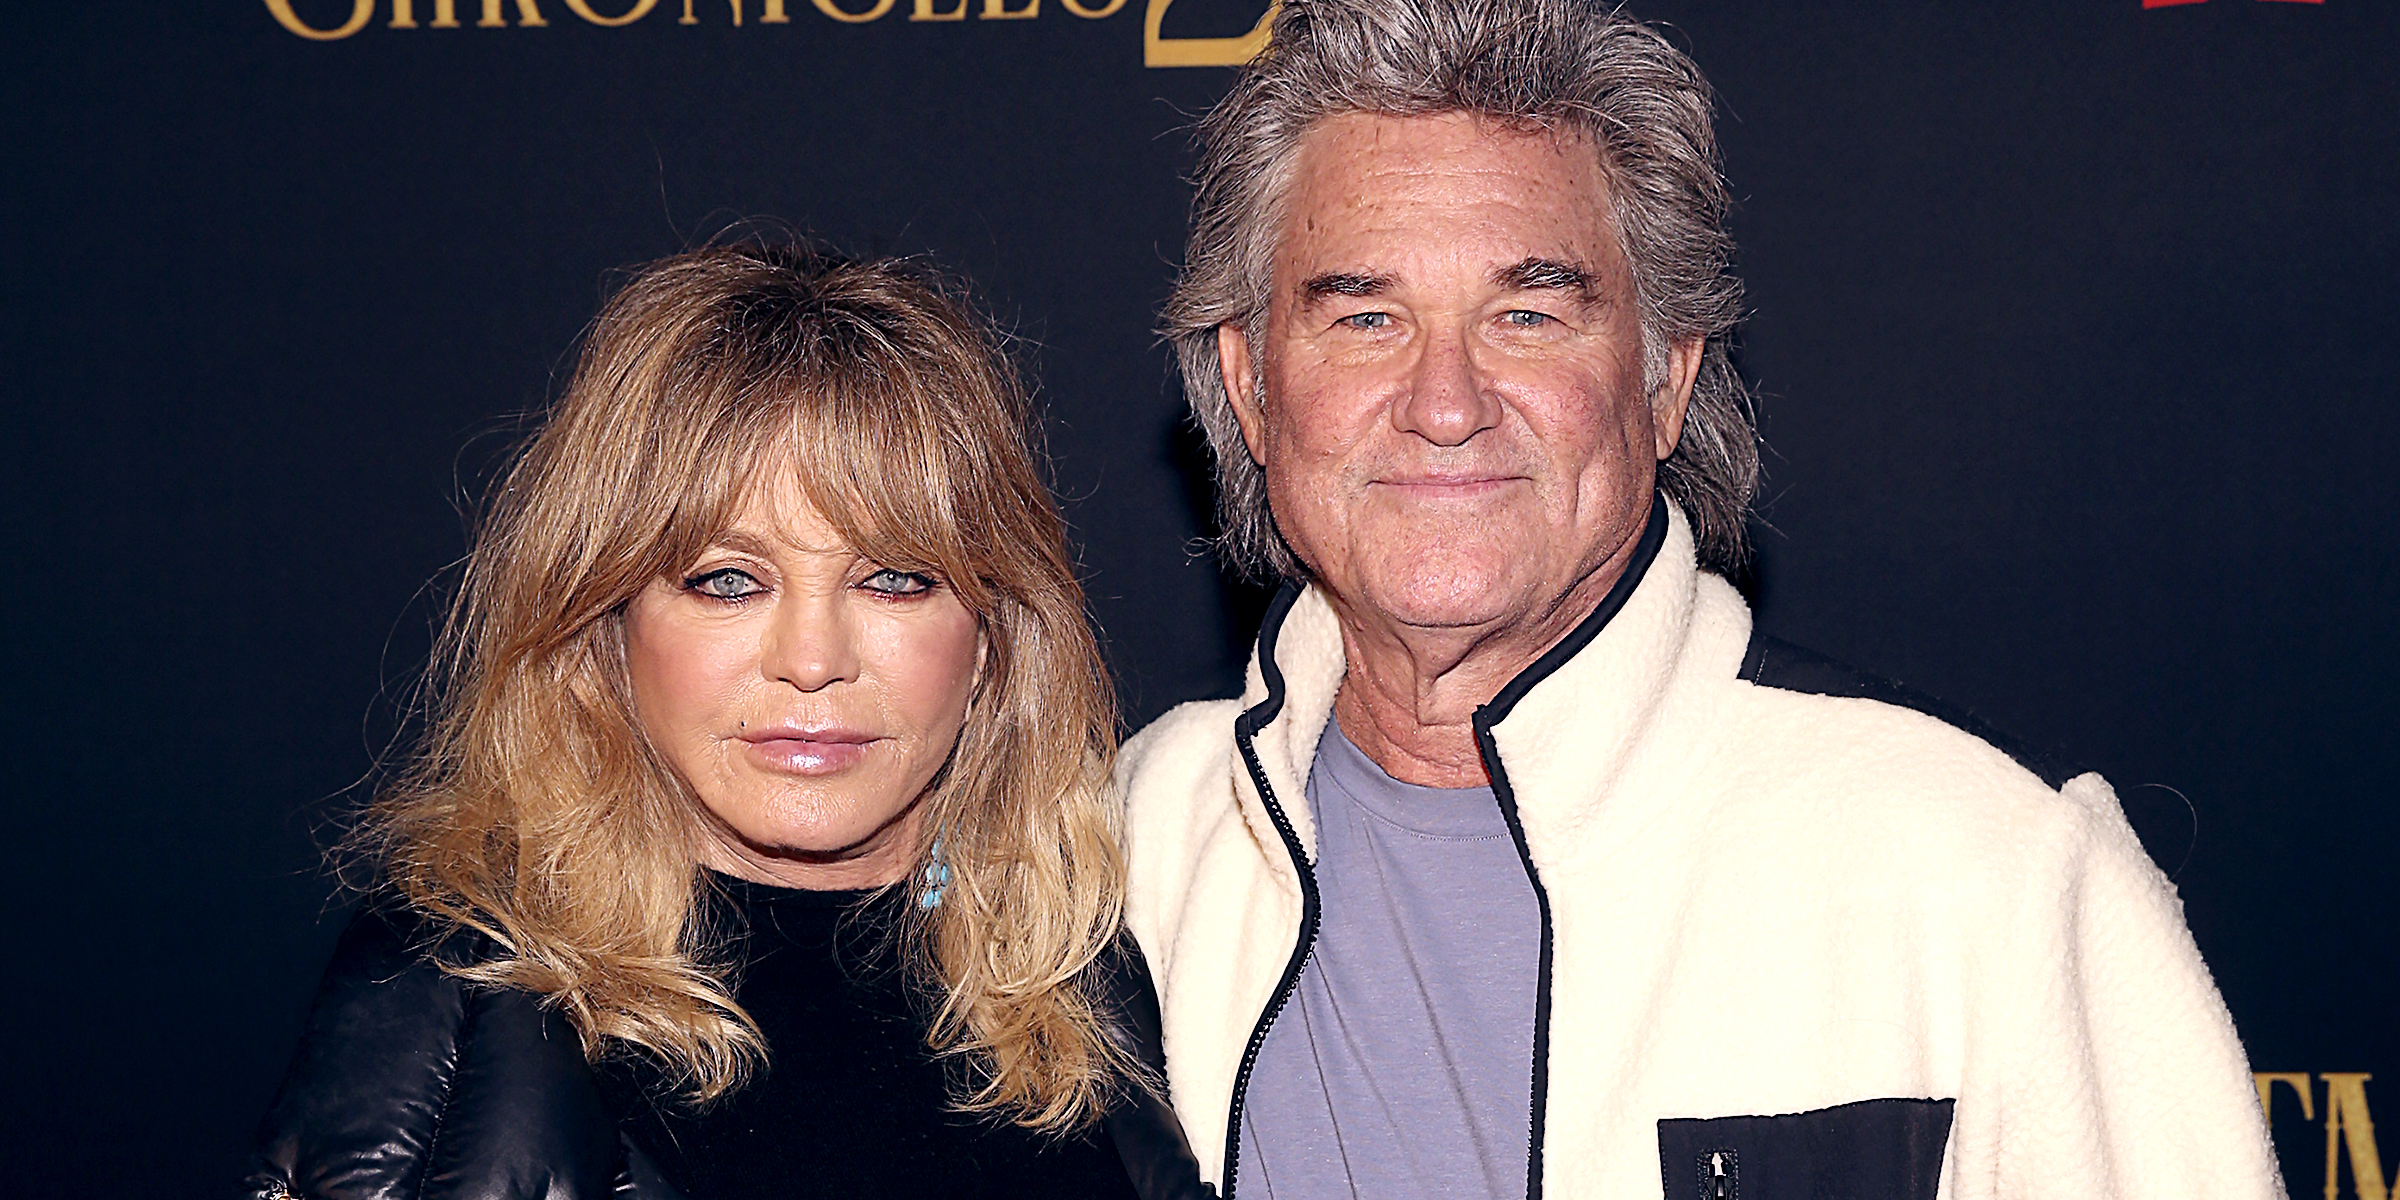 Goldie Hawn and Kurt Russell | Source: Getty Images